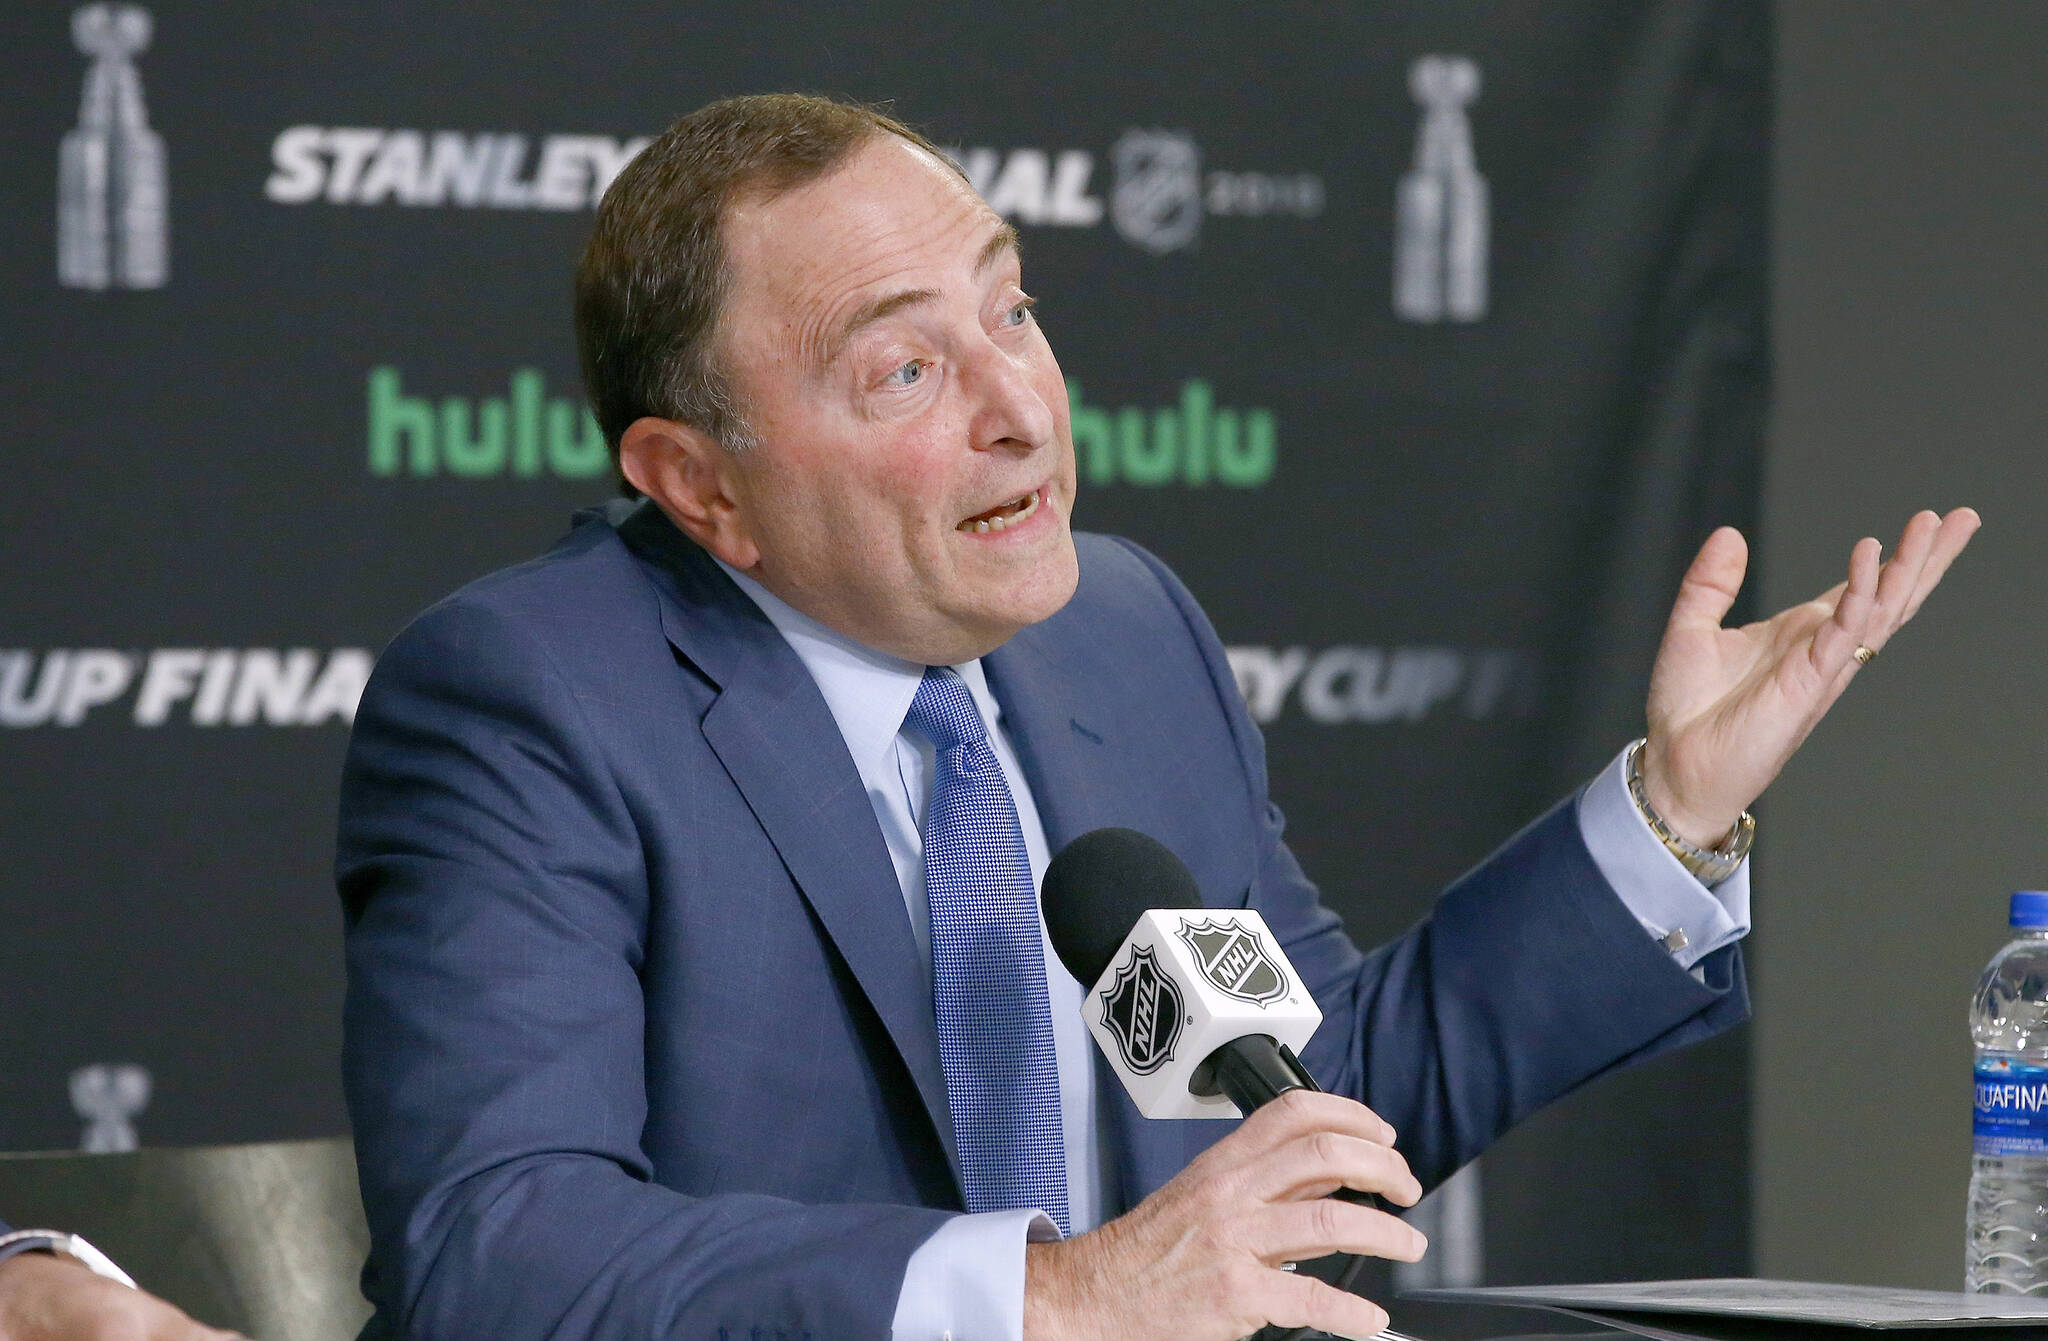 NHL Commissioner Gary Bettman speaks during a news conference prior to Game 1 of the NHL Stanley Cup Final hockey game between the Vegas Golden Knights and the Washington Capitals, Monday, May 28, 2018, in Las Vegas. (AP Photo/Ross D. Franklin)